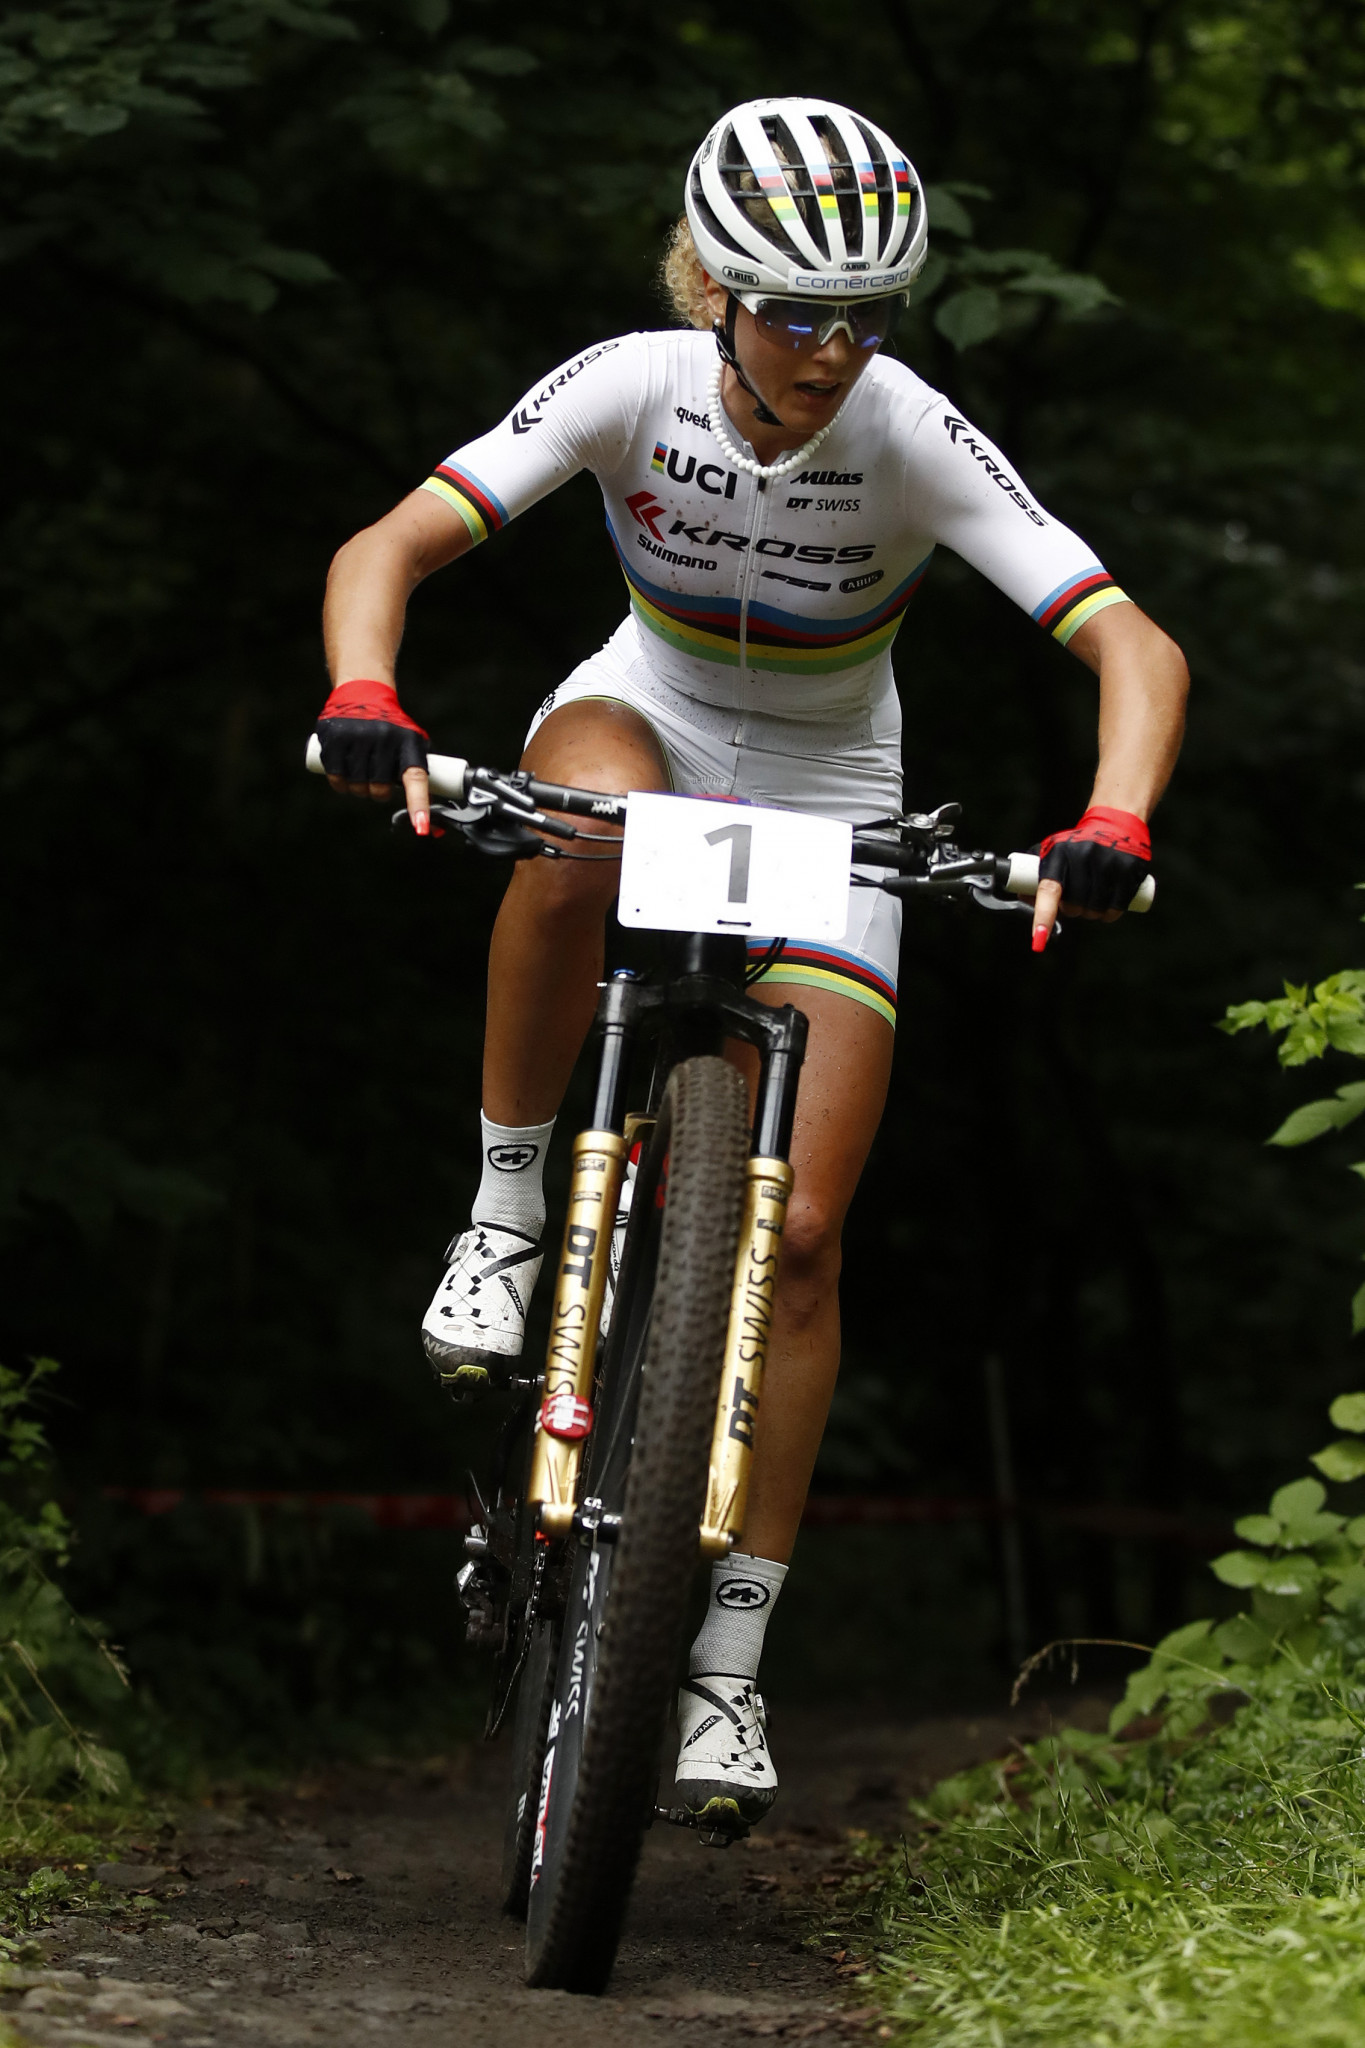 Switzerland's Jolanda Neff is expected to make a strong defence of her title at the UEC Mountain Bike European Championships that start in Brno tomorrow ©Getty Images